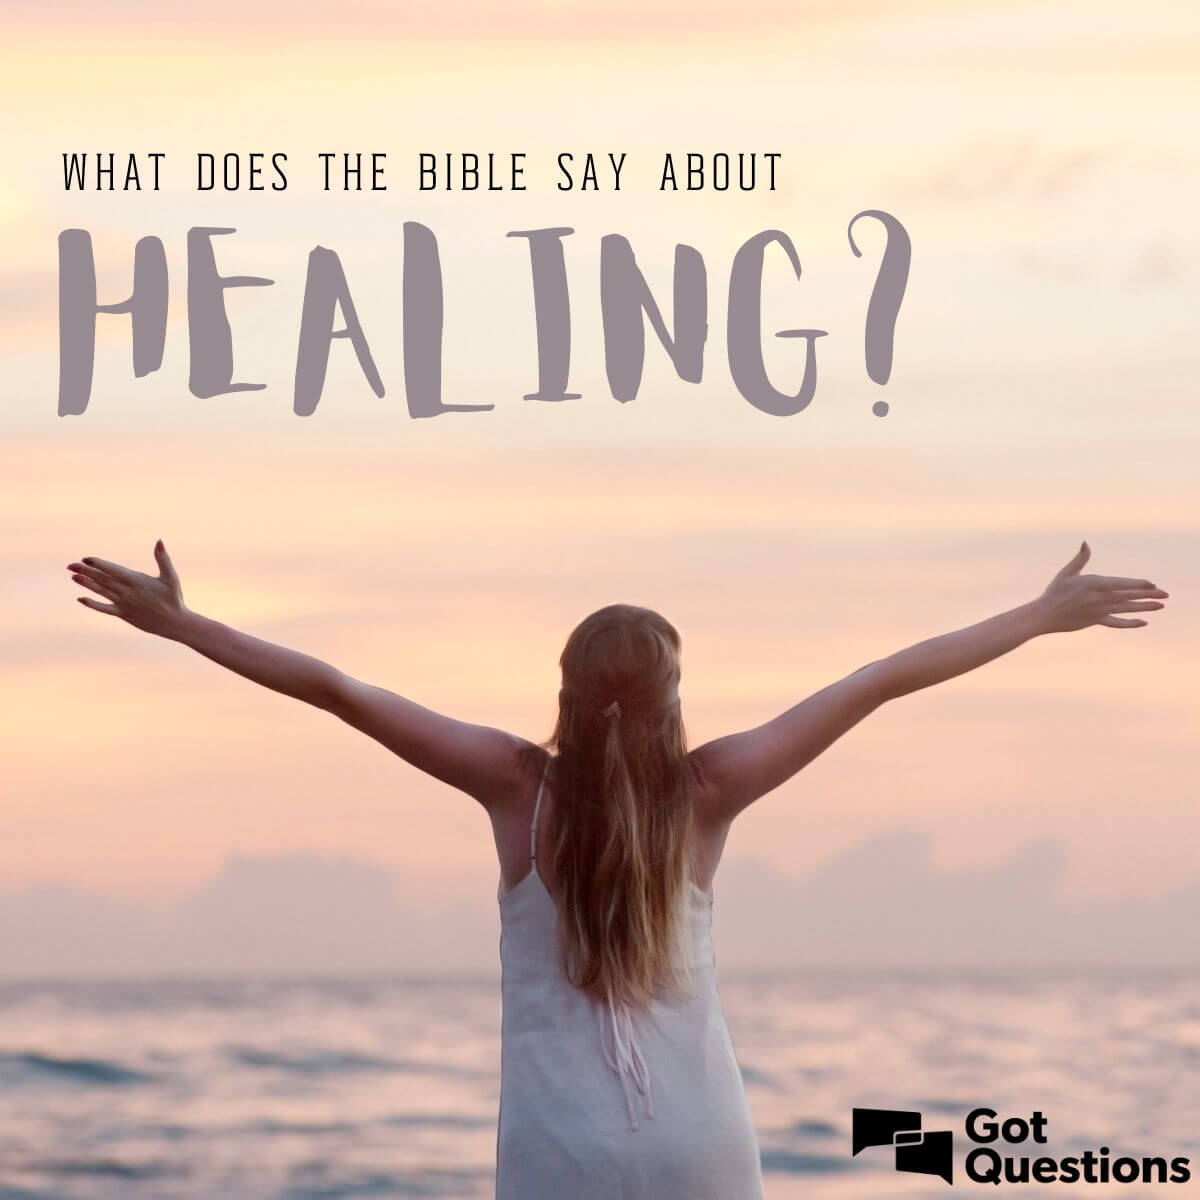 What does the Bible say about healing?